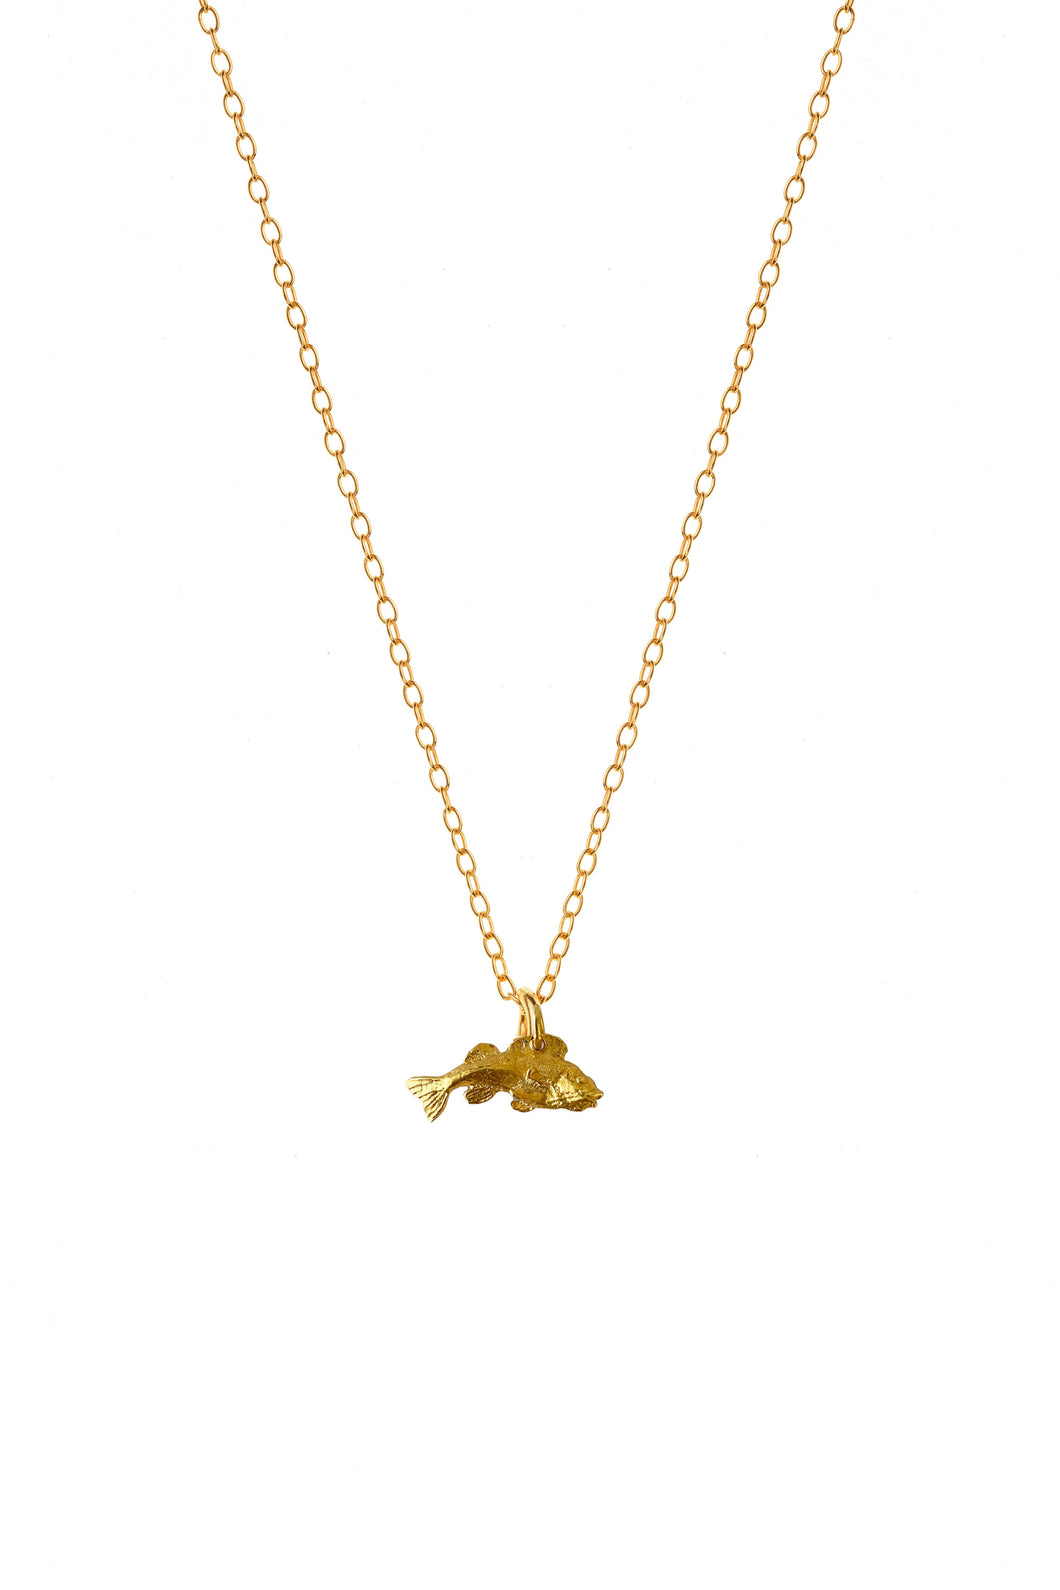 Gold Swimming Fish Charm Necklace